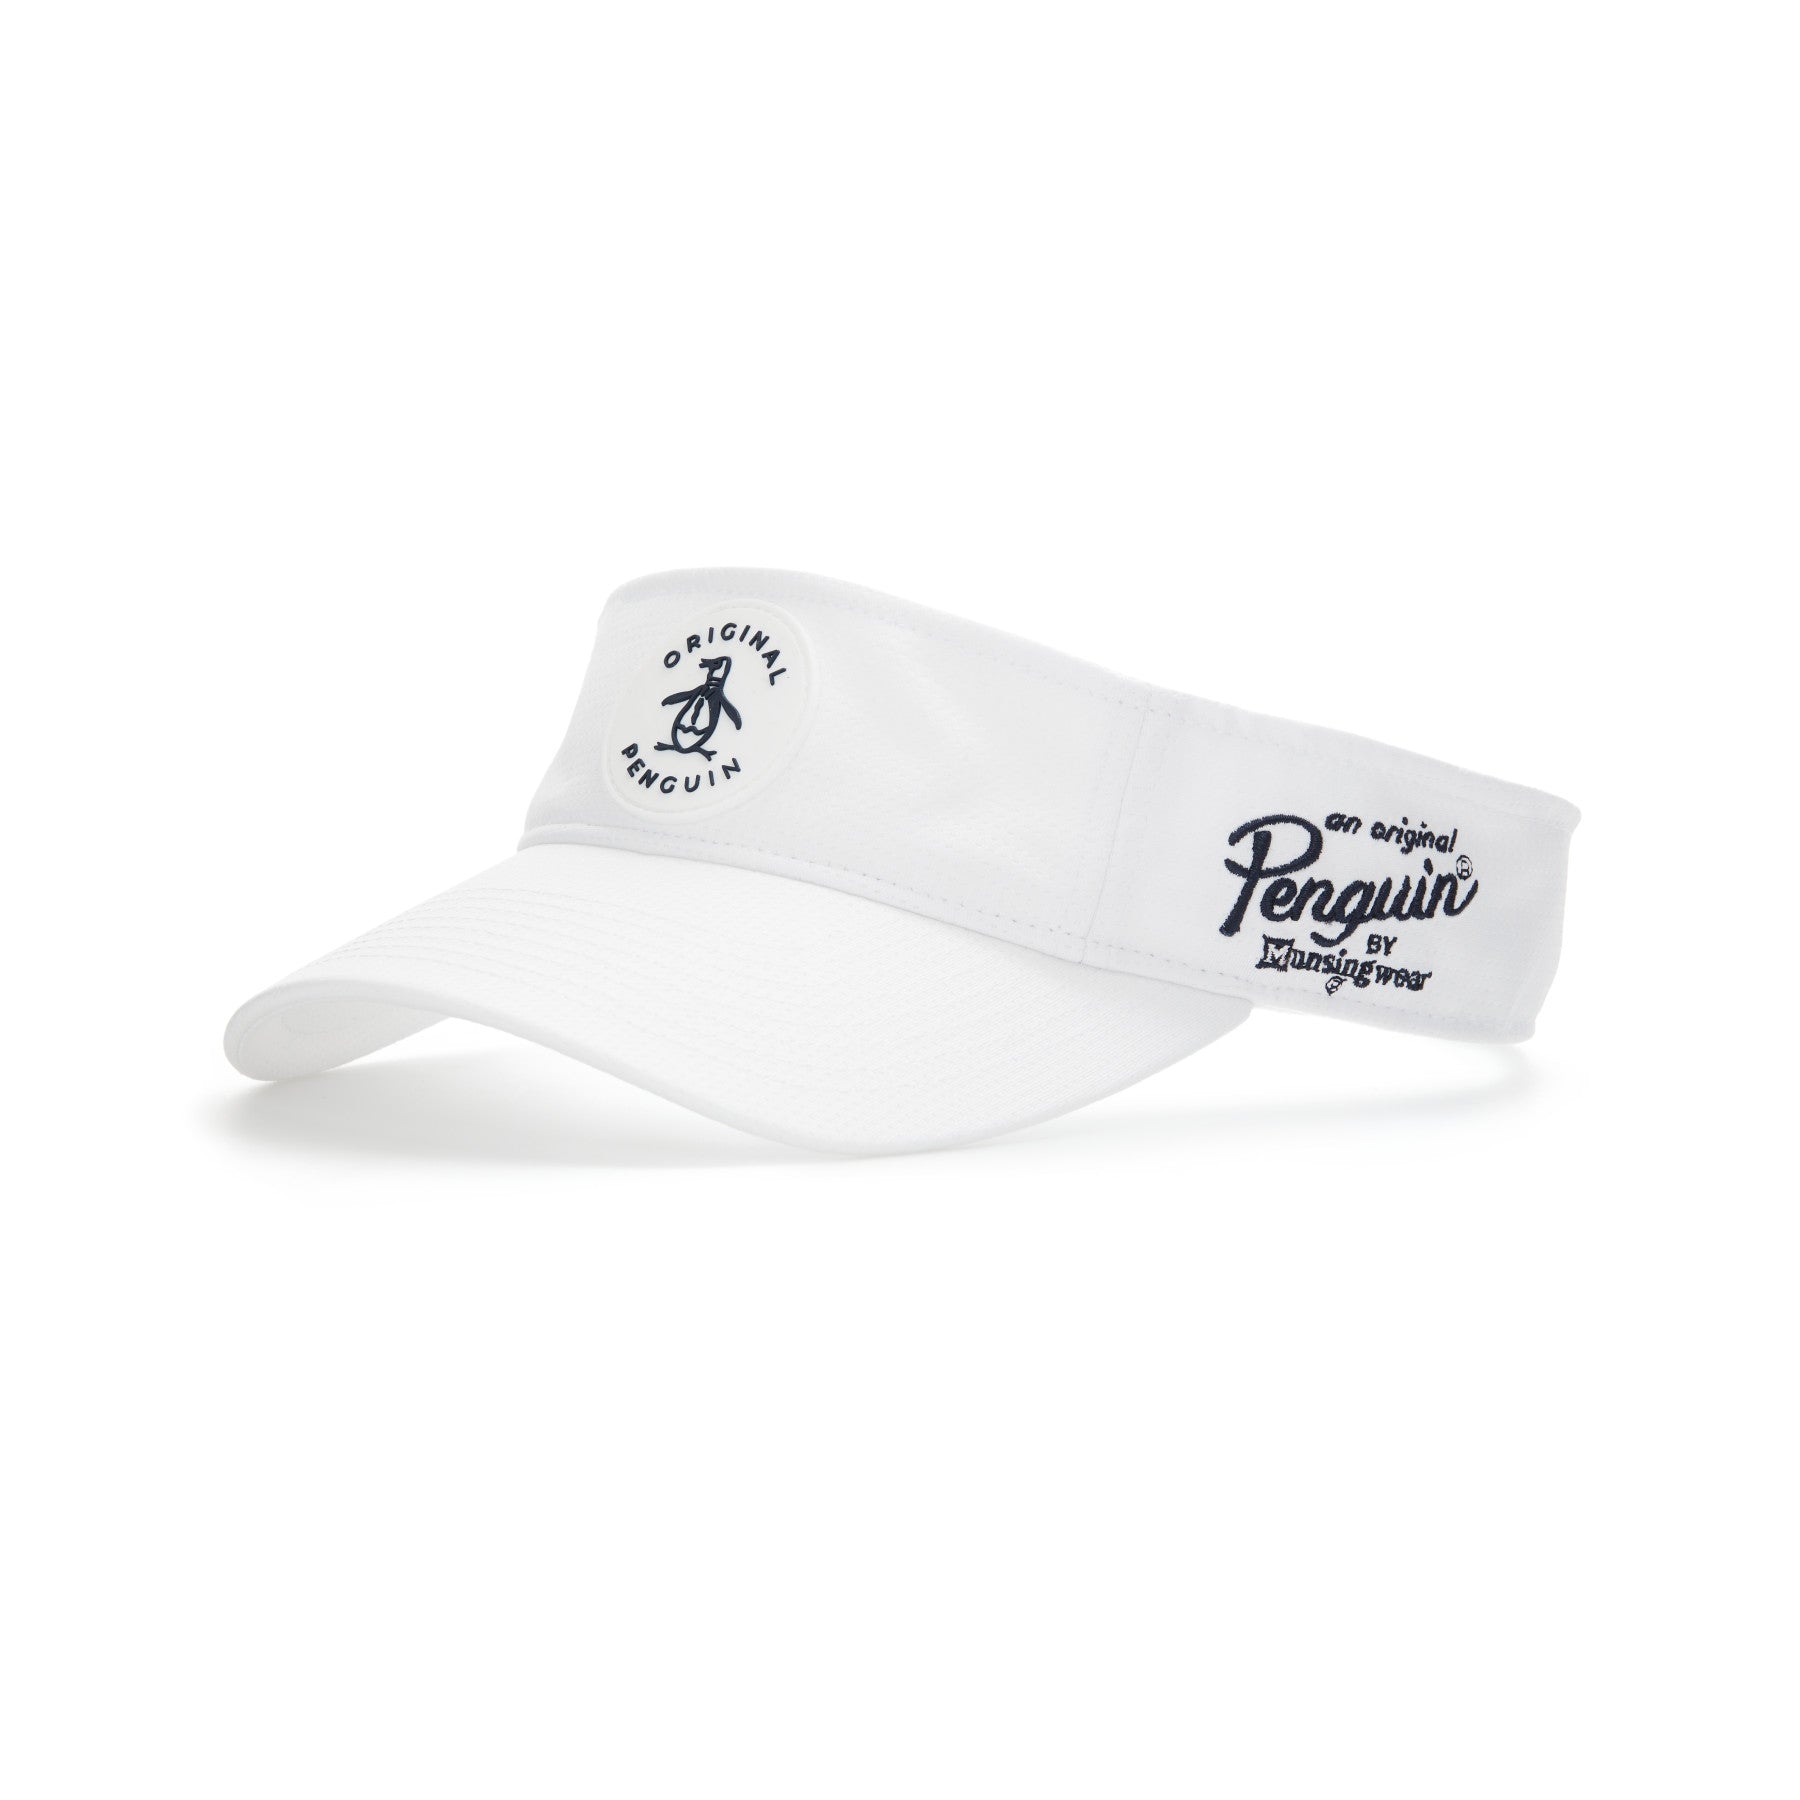 View Rubber Patch Tennis Visor In Bright White information